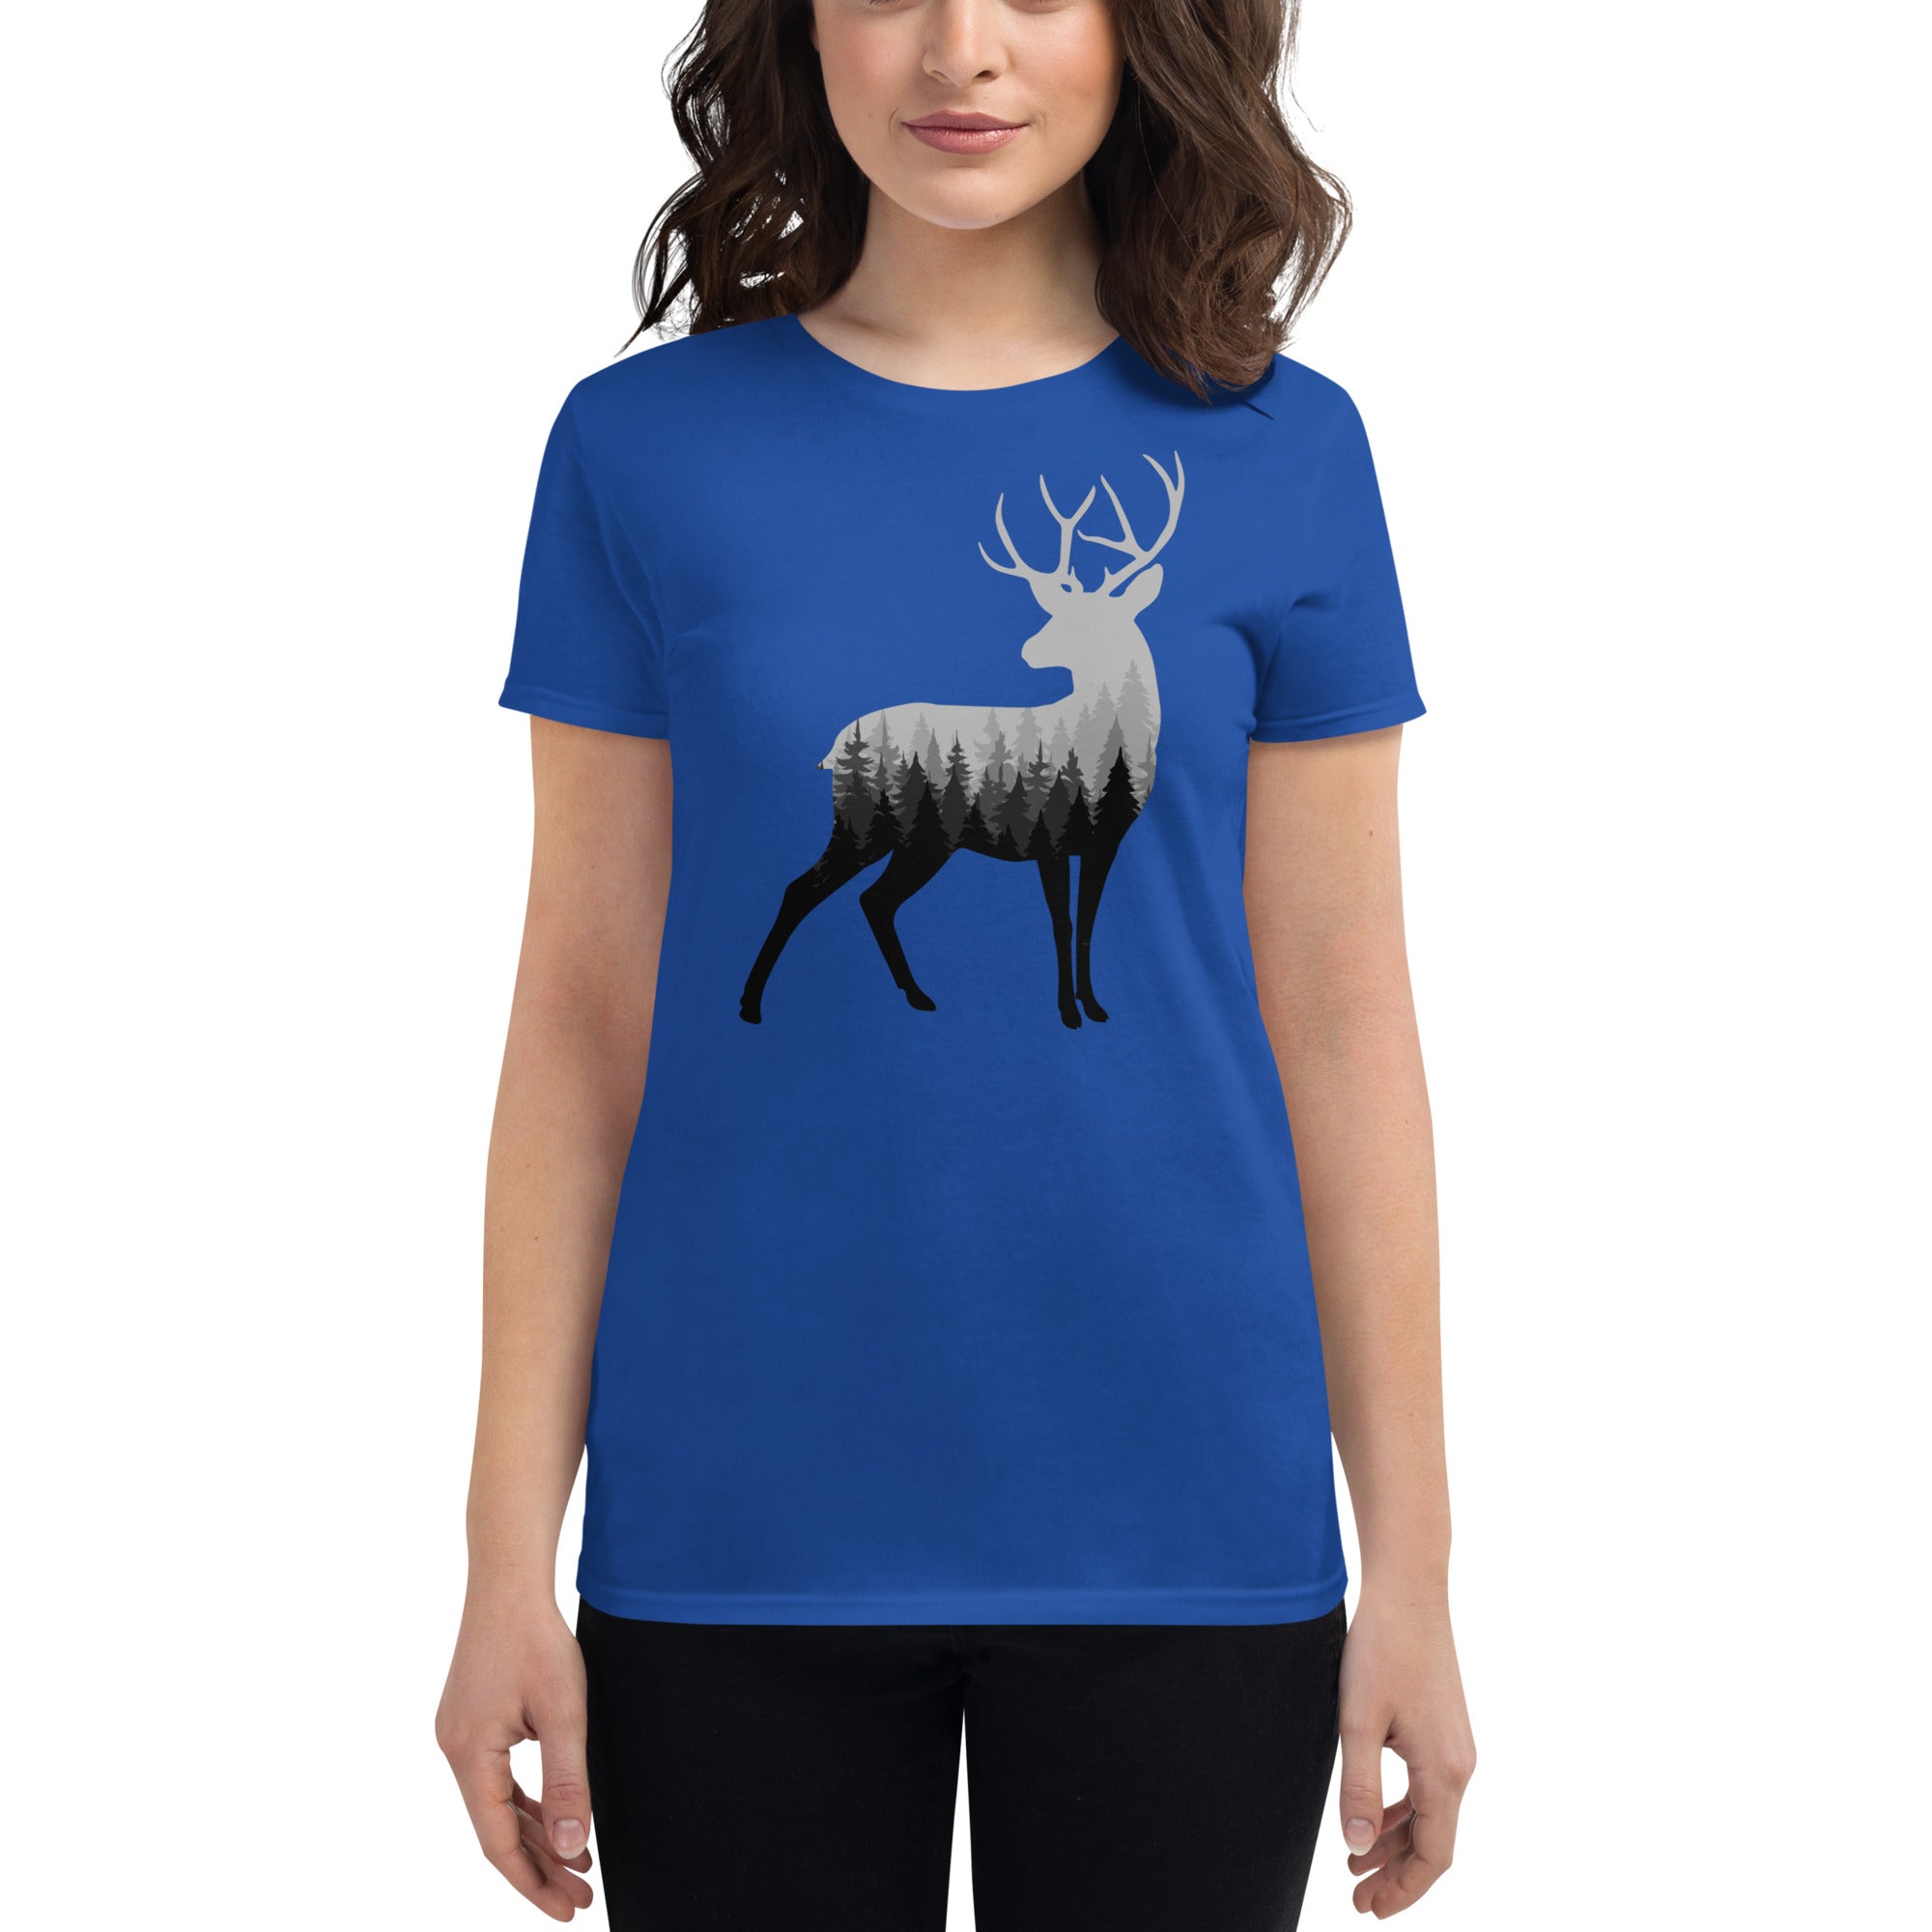 Buck n' Trees Women's Fitted T-Shirt